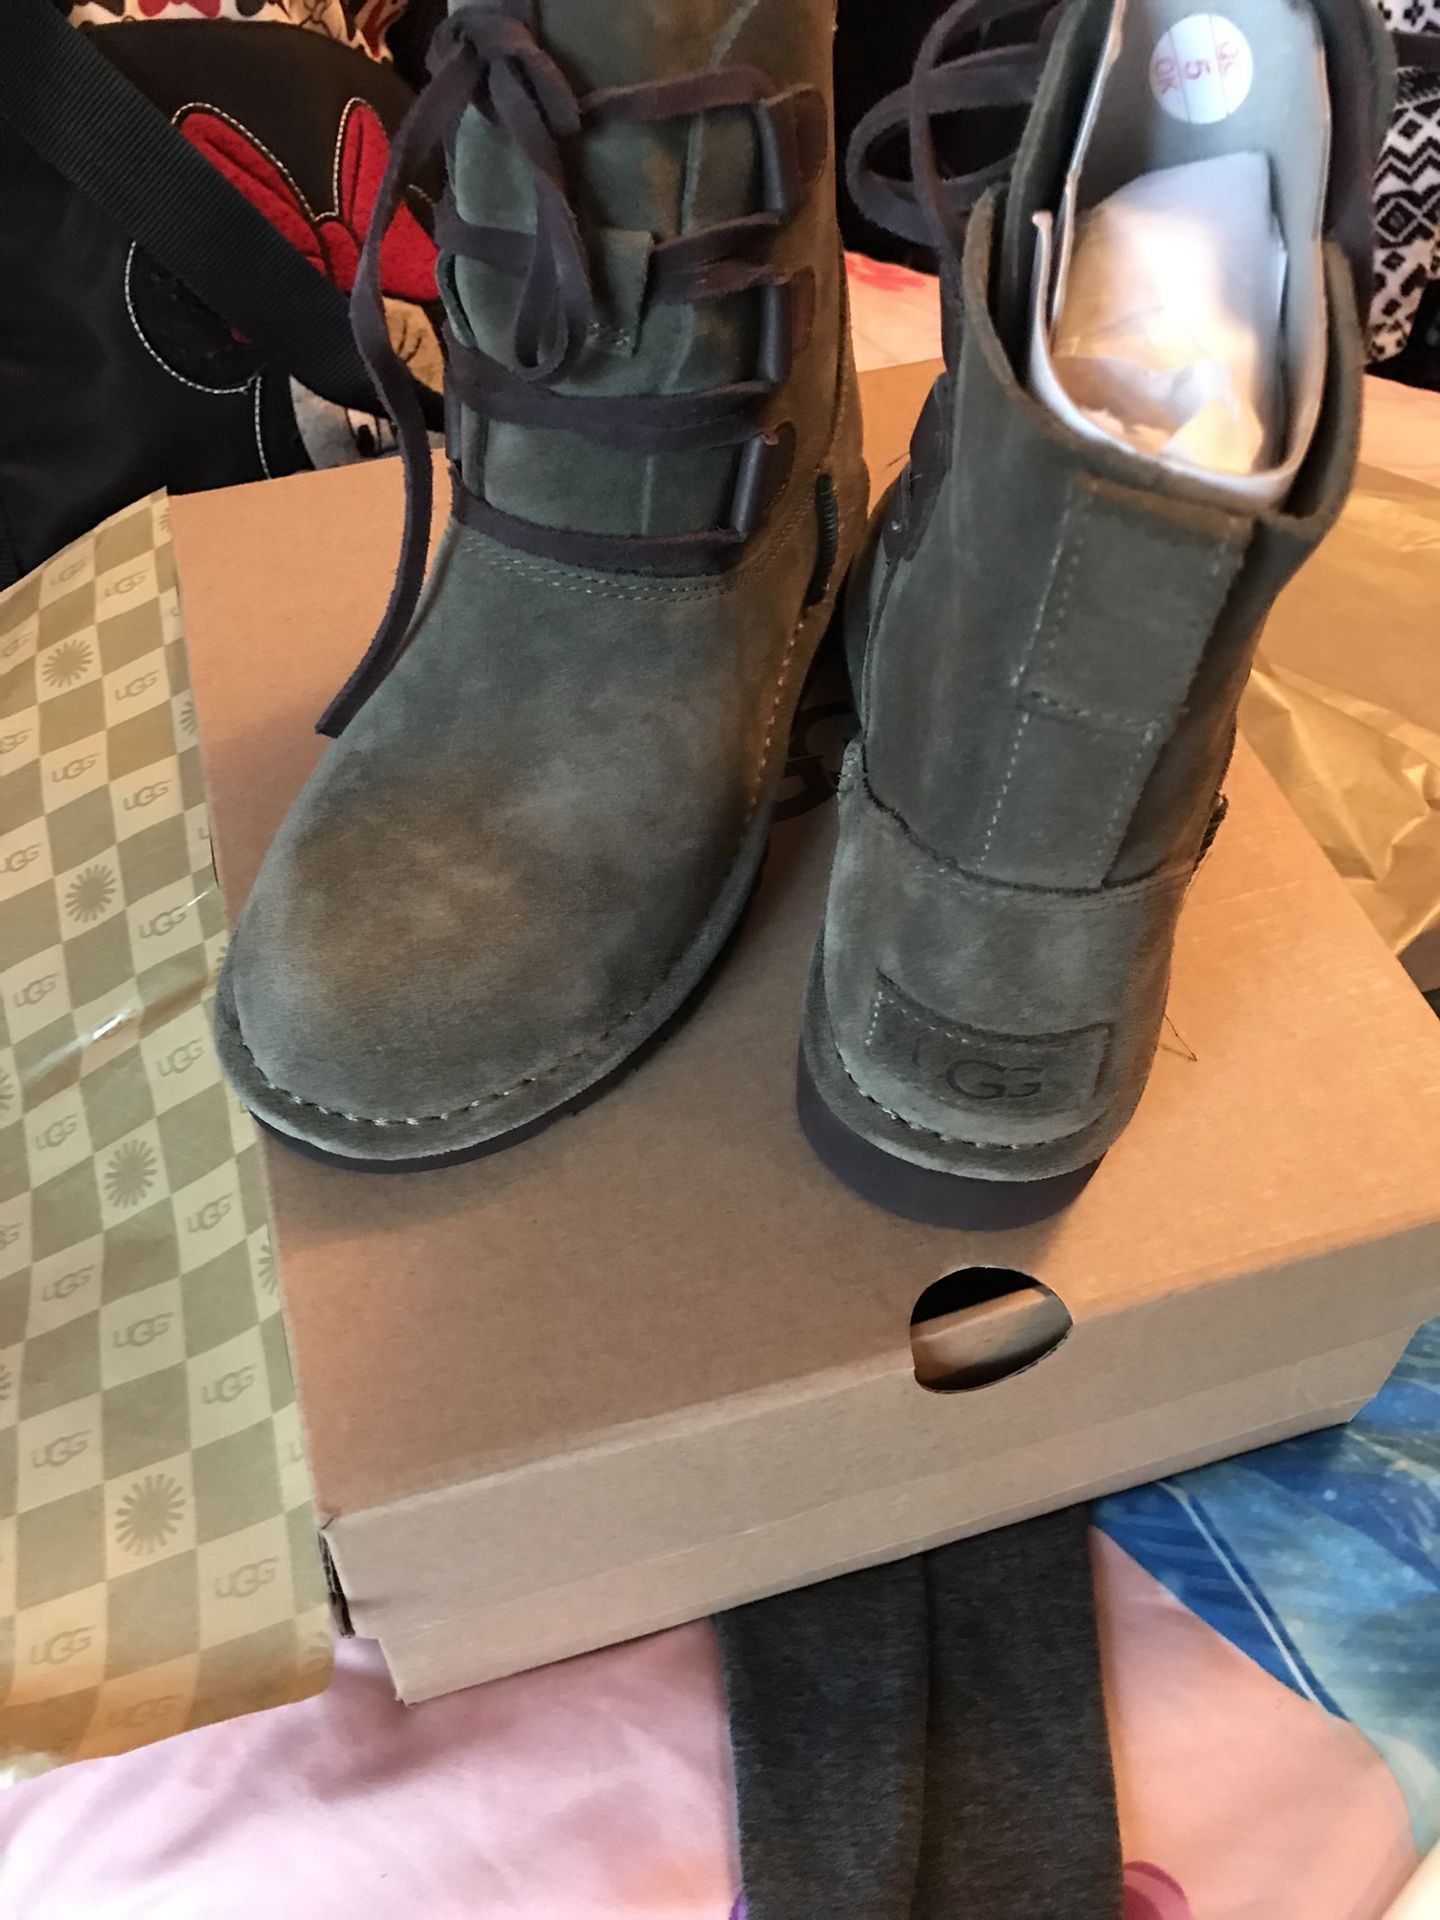 New ugg boots